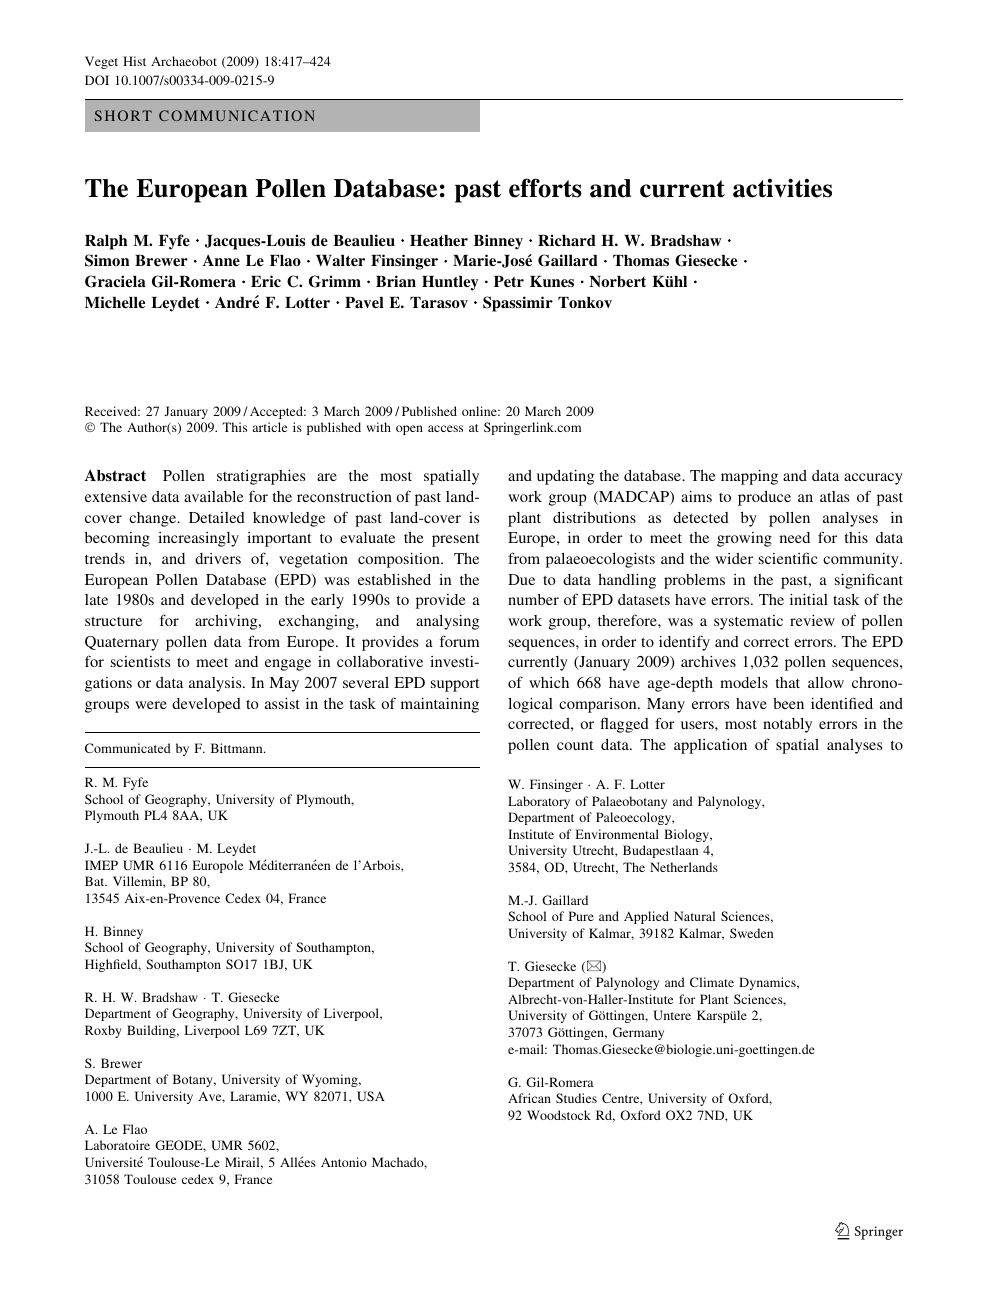 The European Pollen Database Past Efforts And Current Activities Topic Of Research Paper In History And Archaeology Download Scholarly Article Pdf And Read For Free On Cyberleninka Open Science Hub